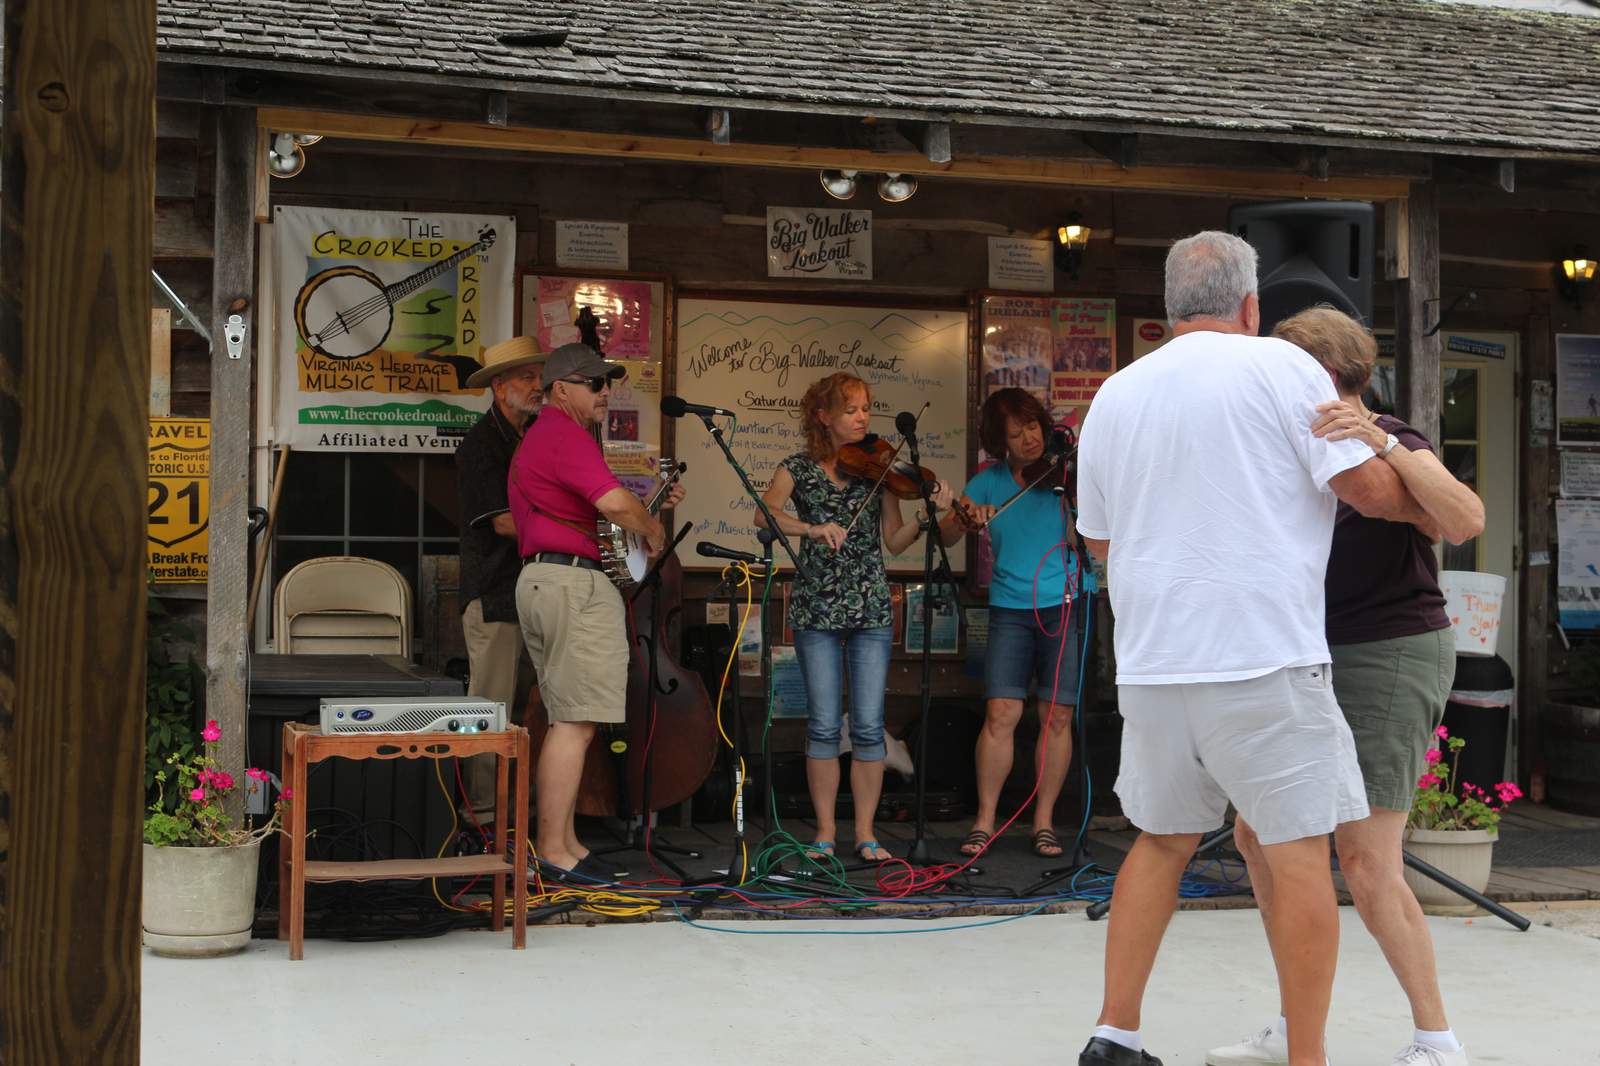 Virginia’s oldest privately owned attraction is keeping mountain music alive in Wytheville